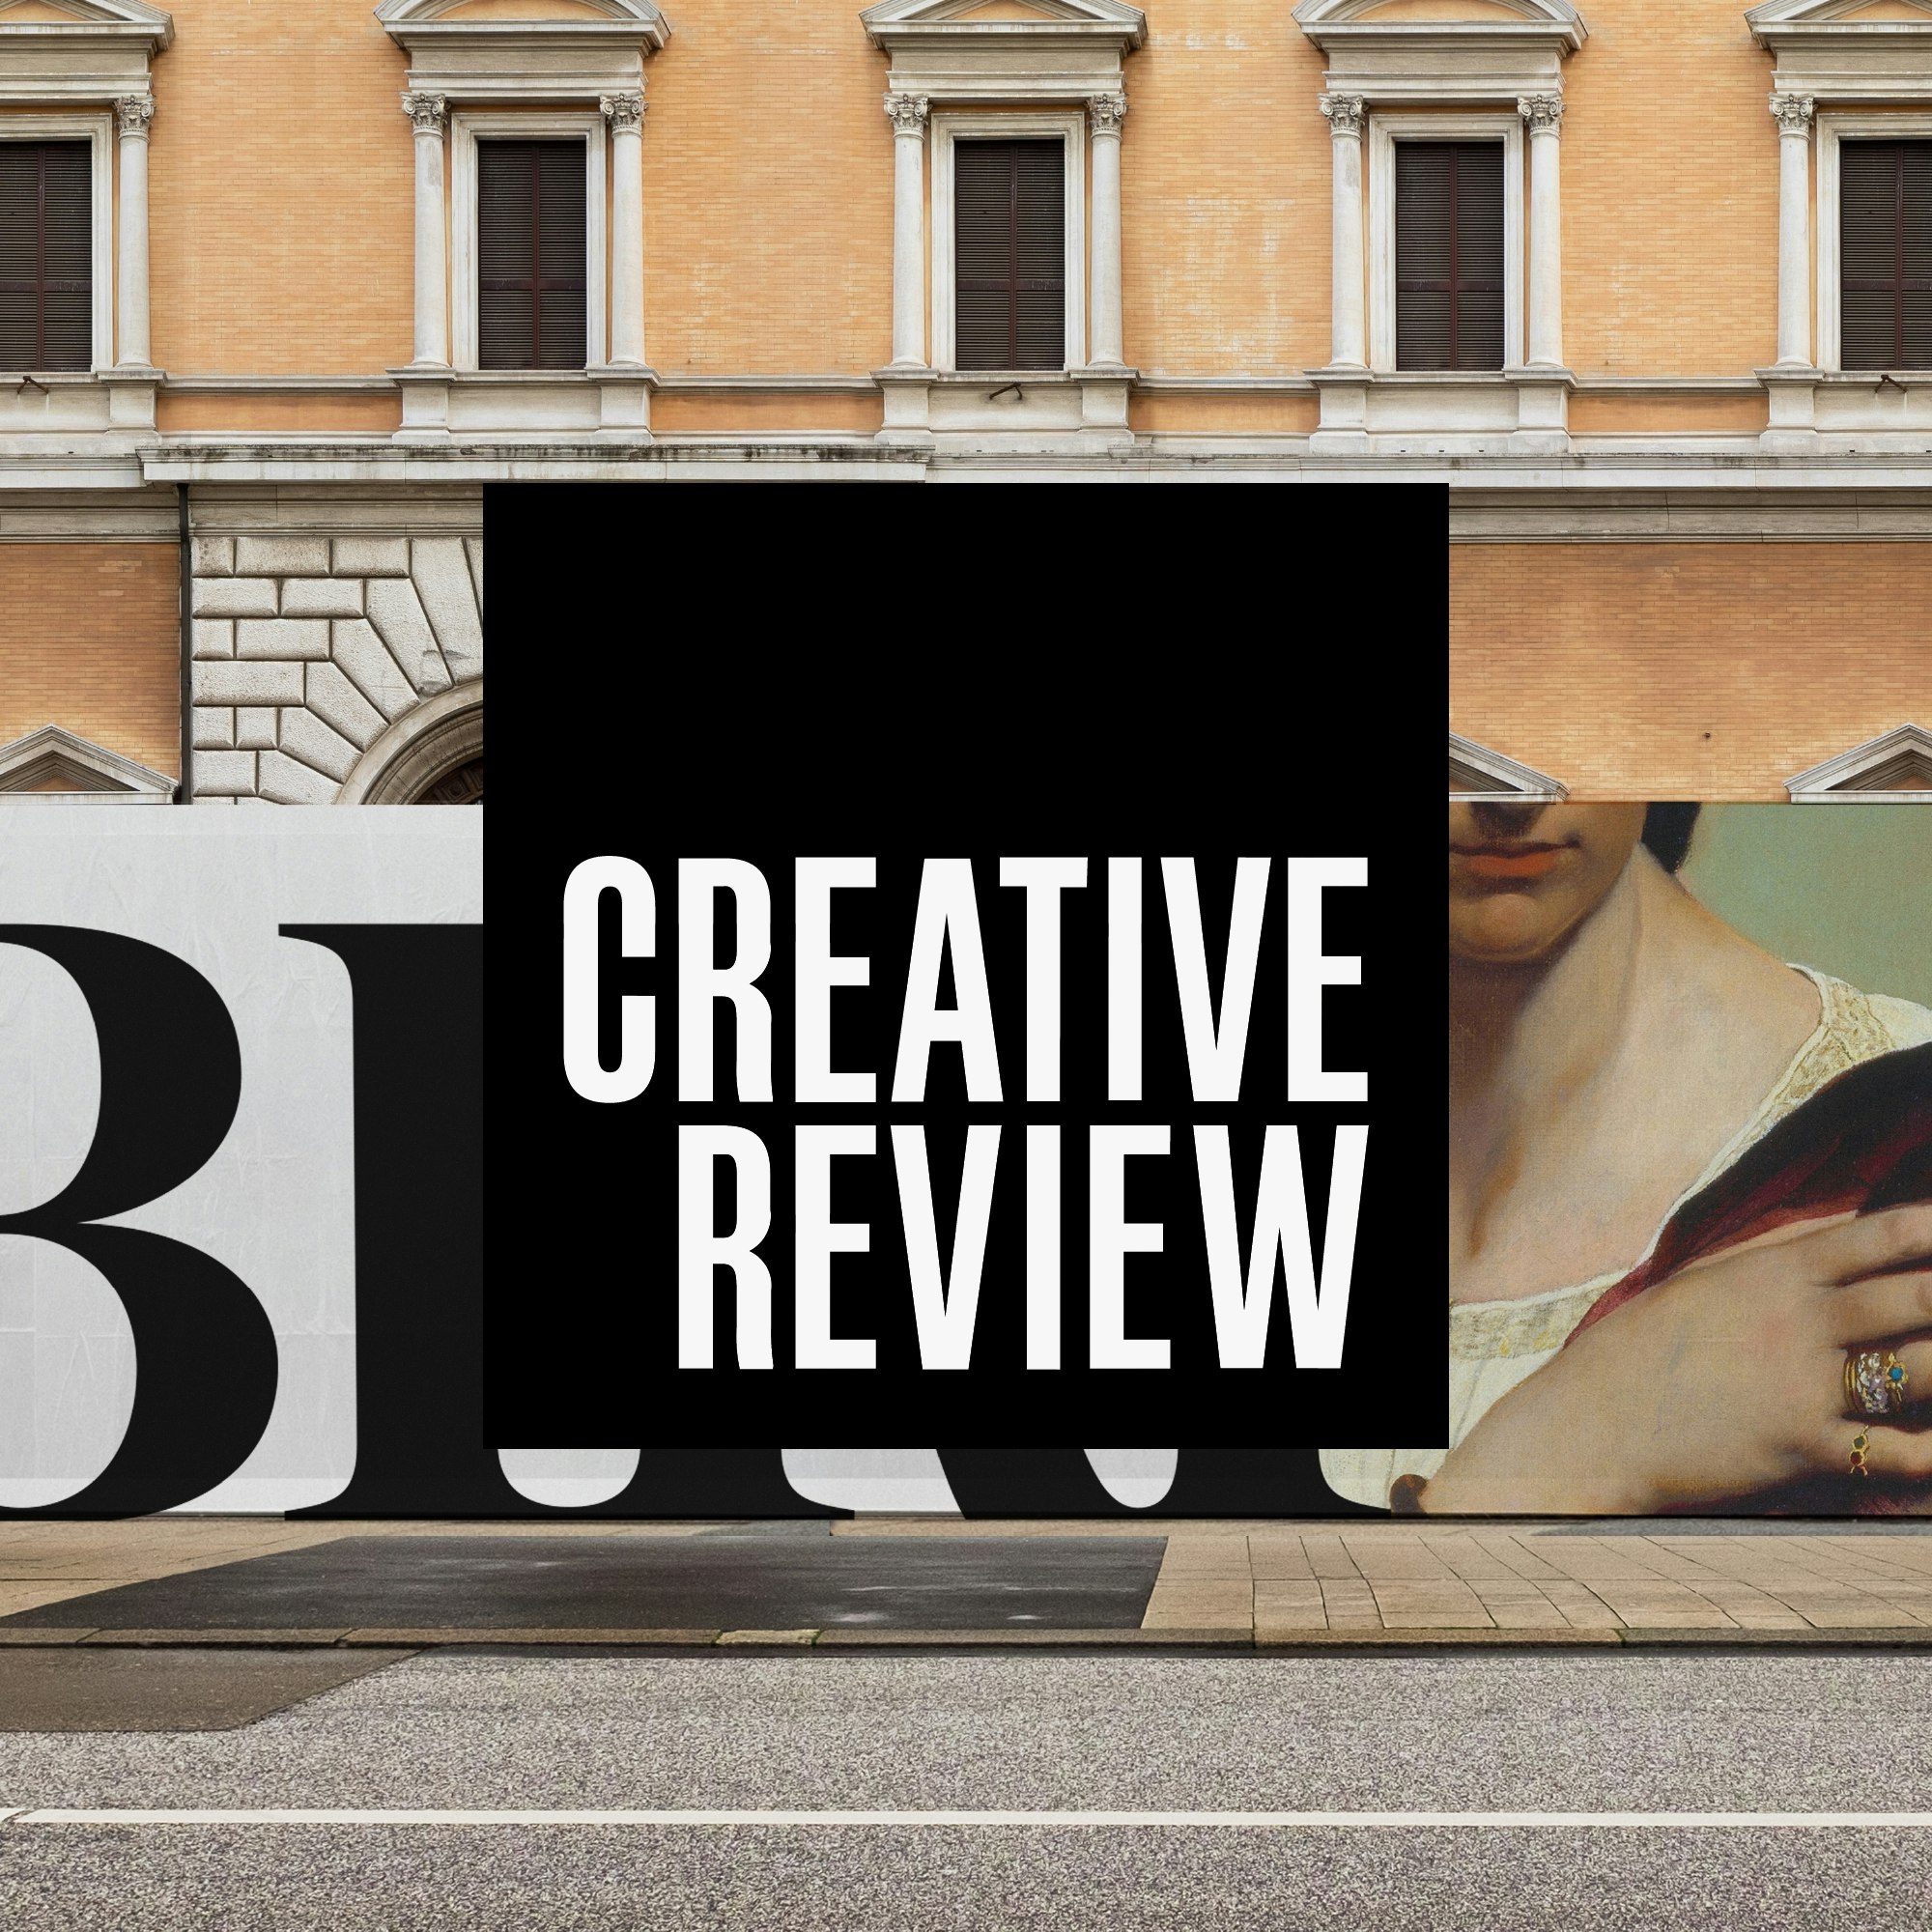 The Creative Review logo overlaid over a digitally created photograph of hoarding with elements of the BIRI brand identity on it.